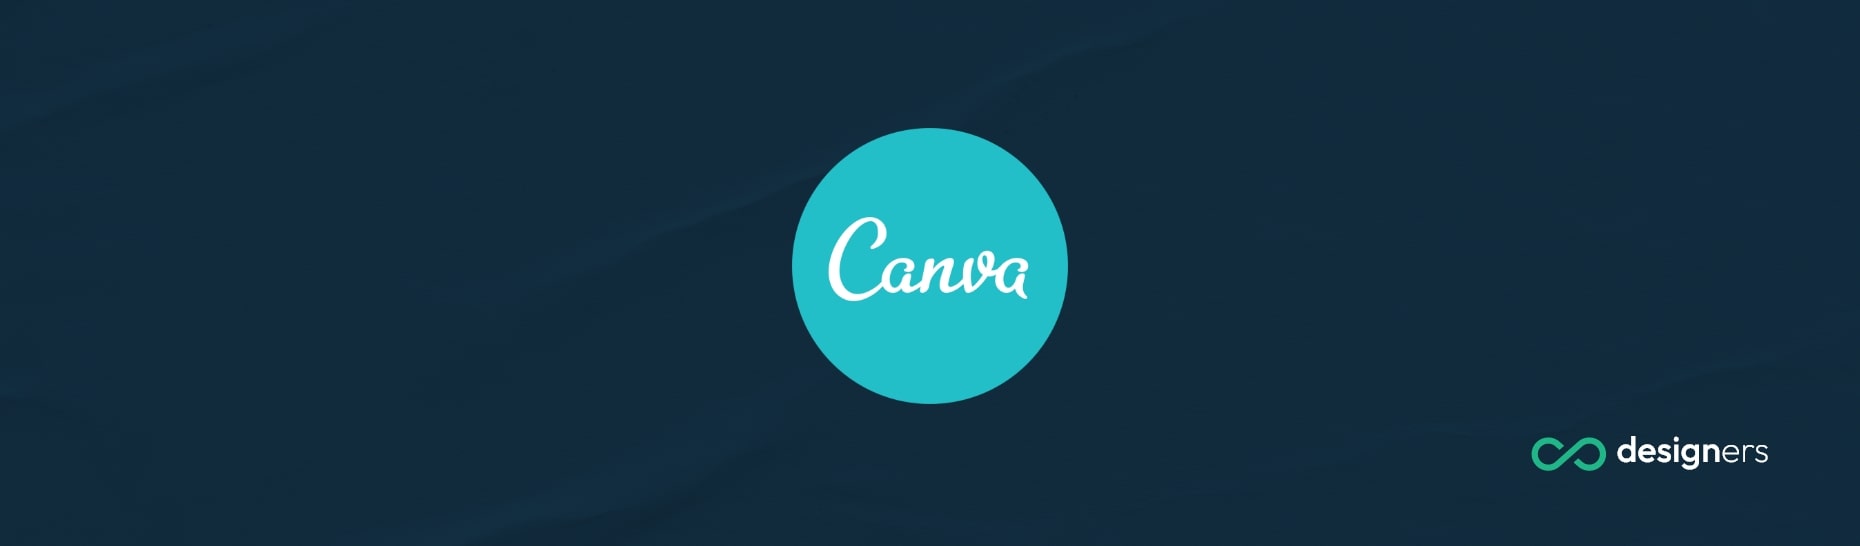 Is There a Canva Chat?